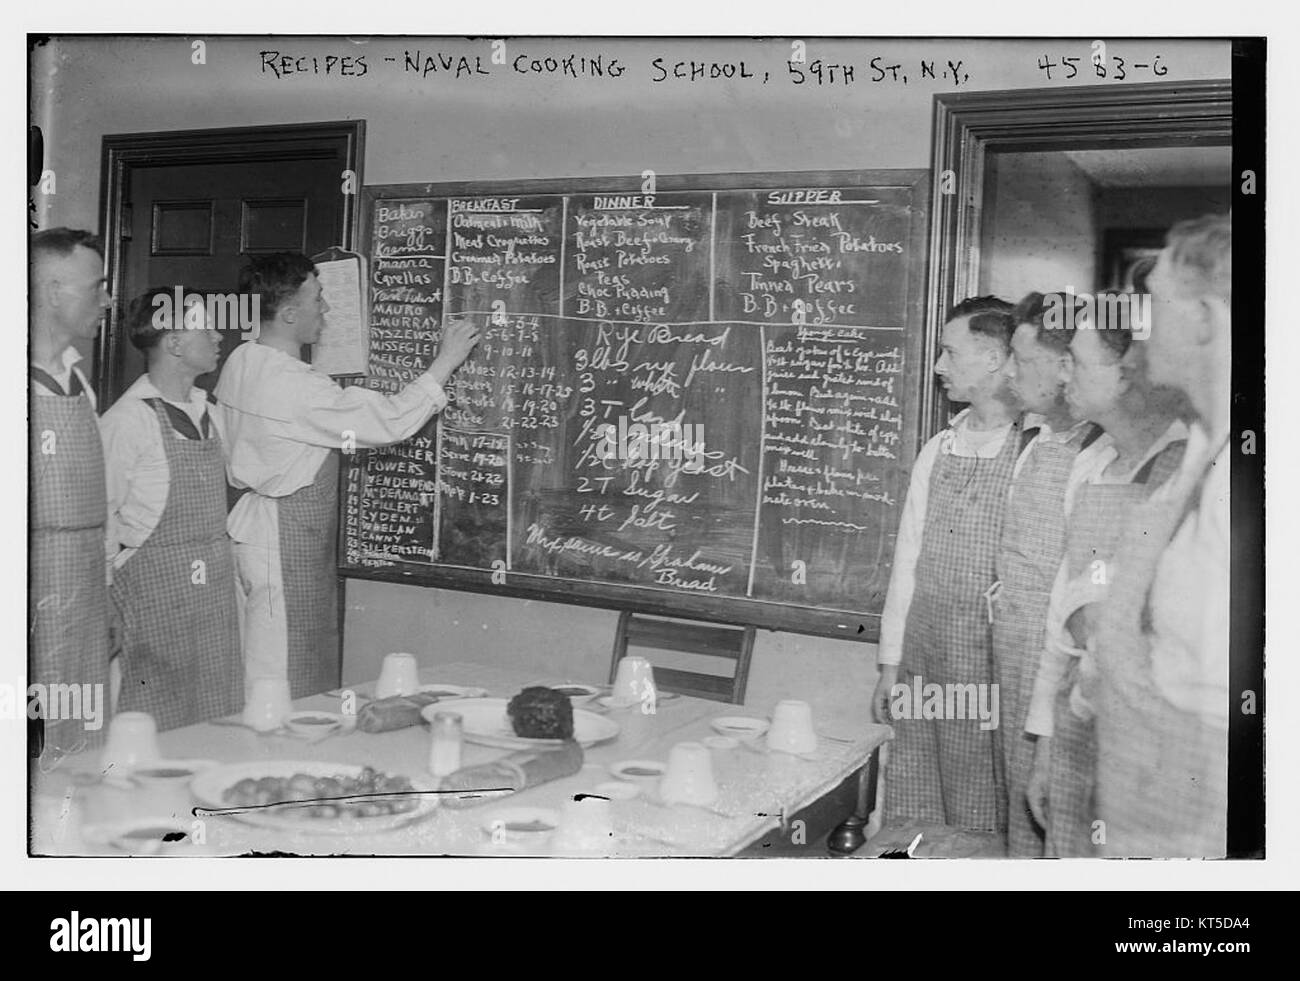 Recipes -- Naval cooking school 59th St., N.Y.  (26385507363) Stock Photo